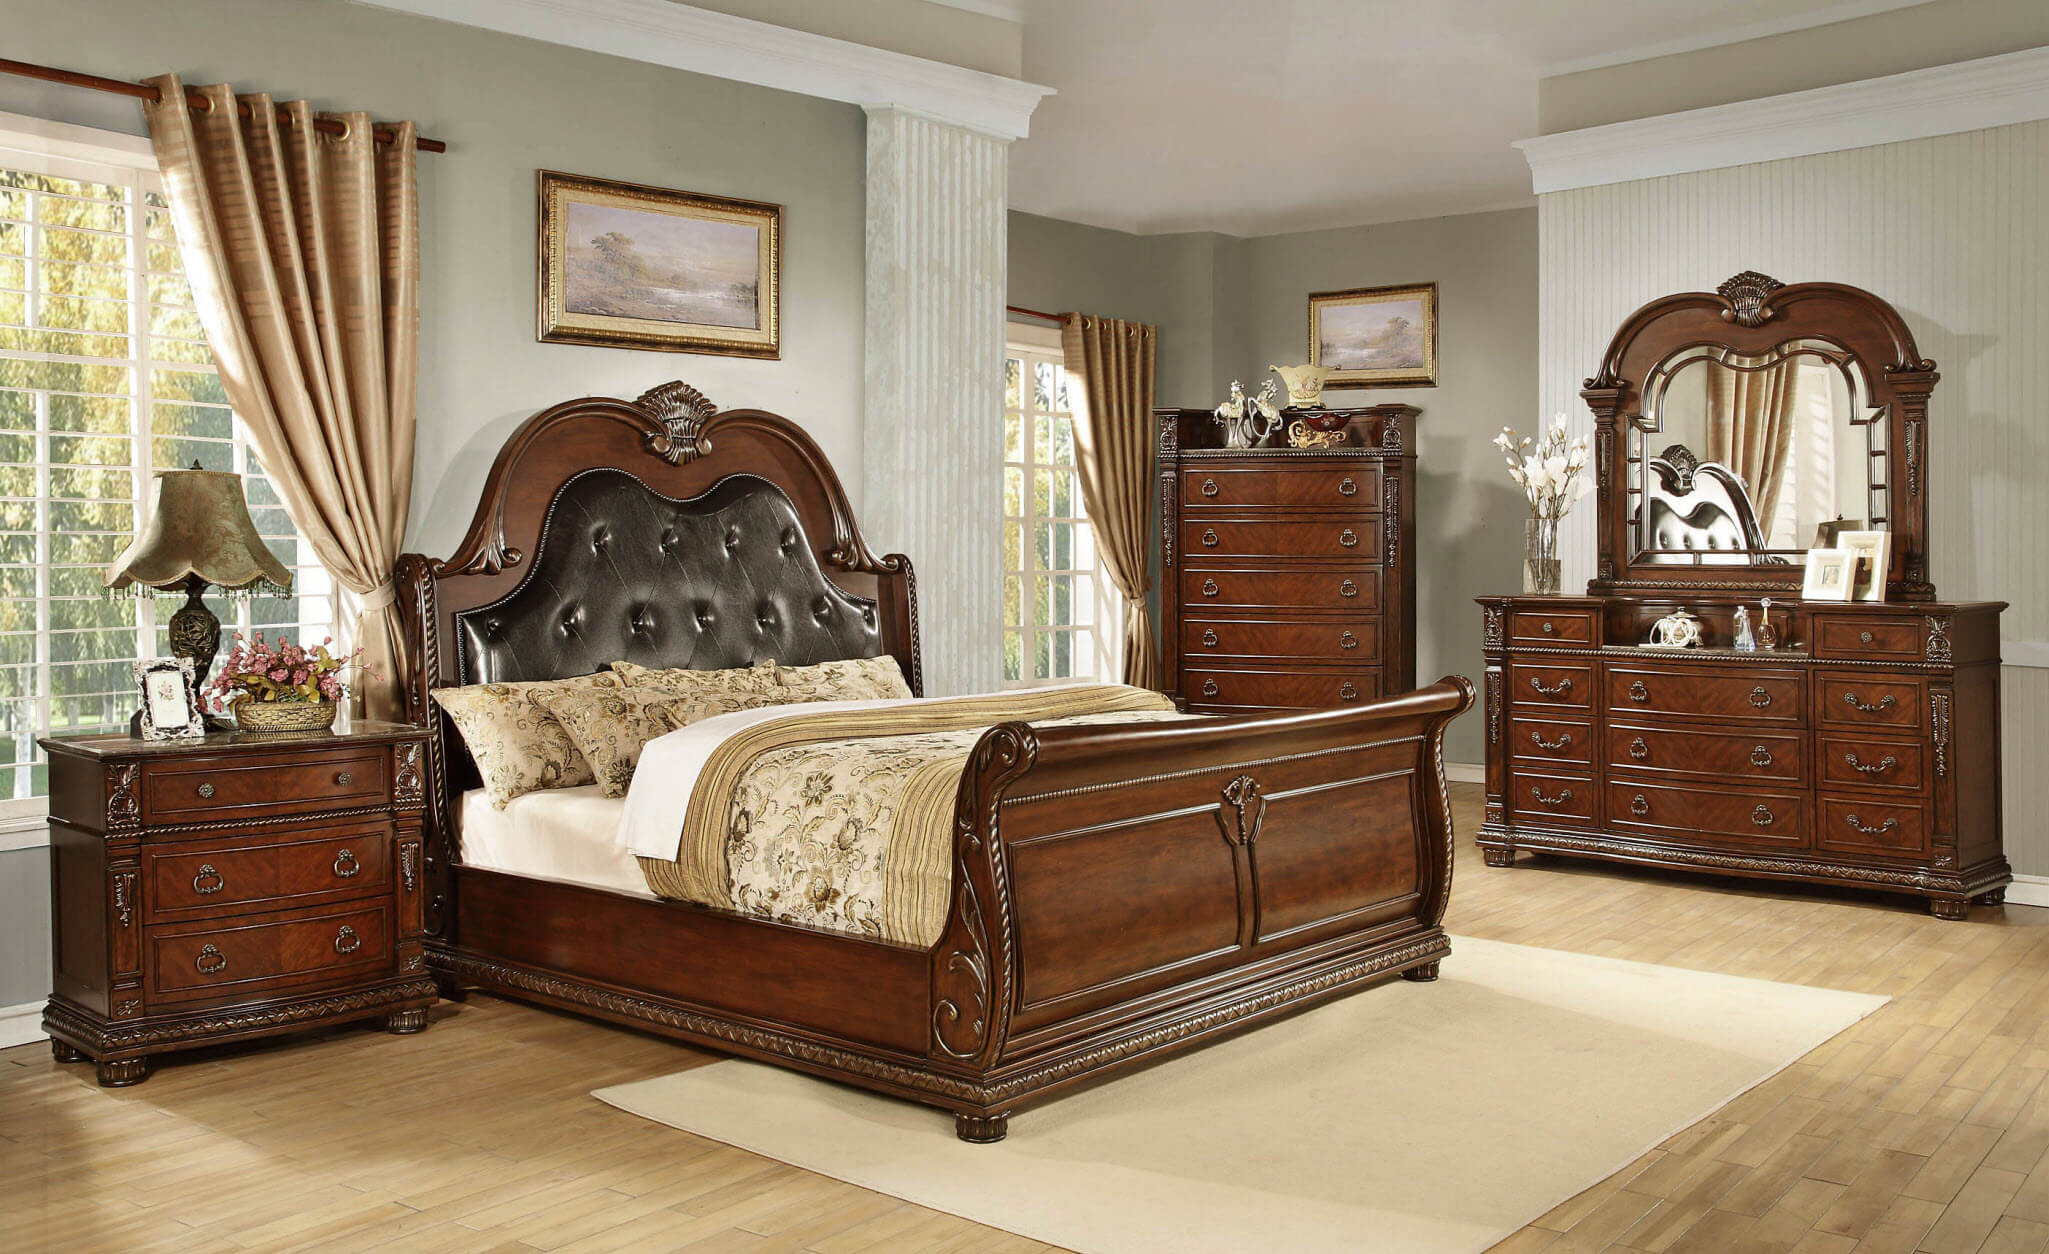 B718 Palace Marble Top Bedroom Set Global Trading intended for sizing 2049 X 1254